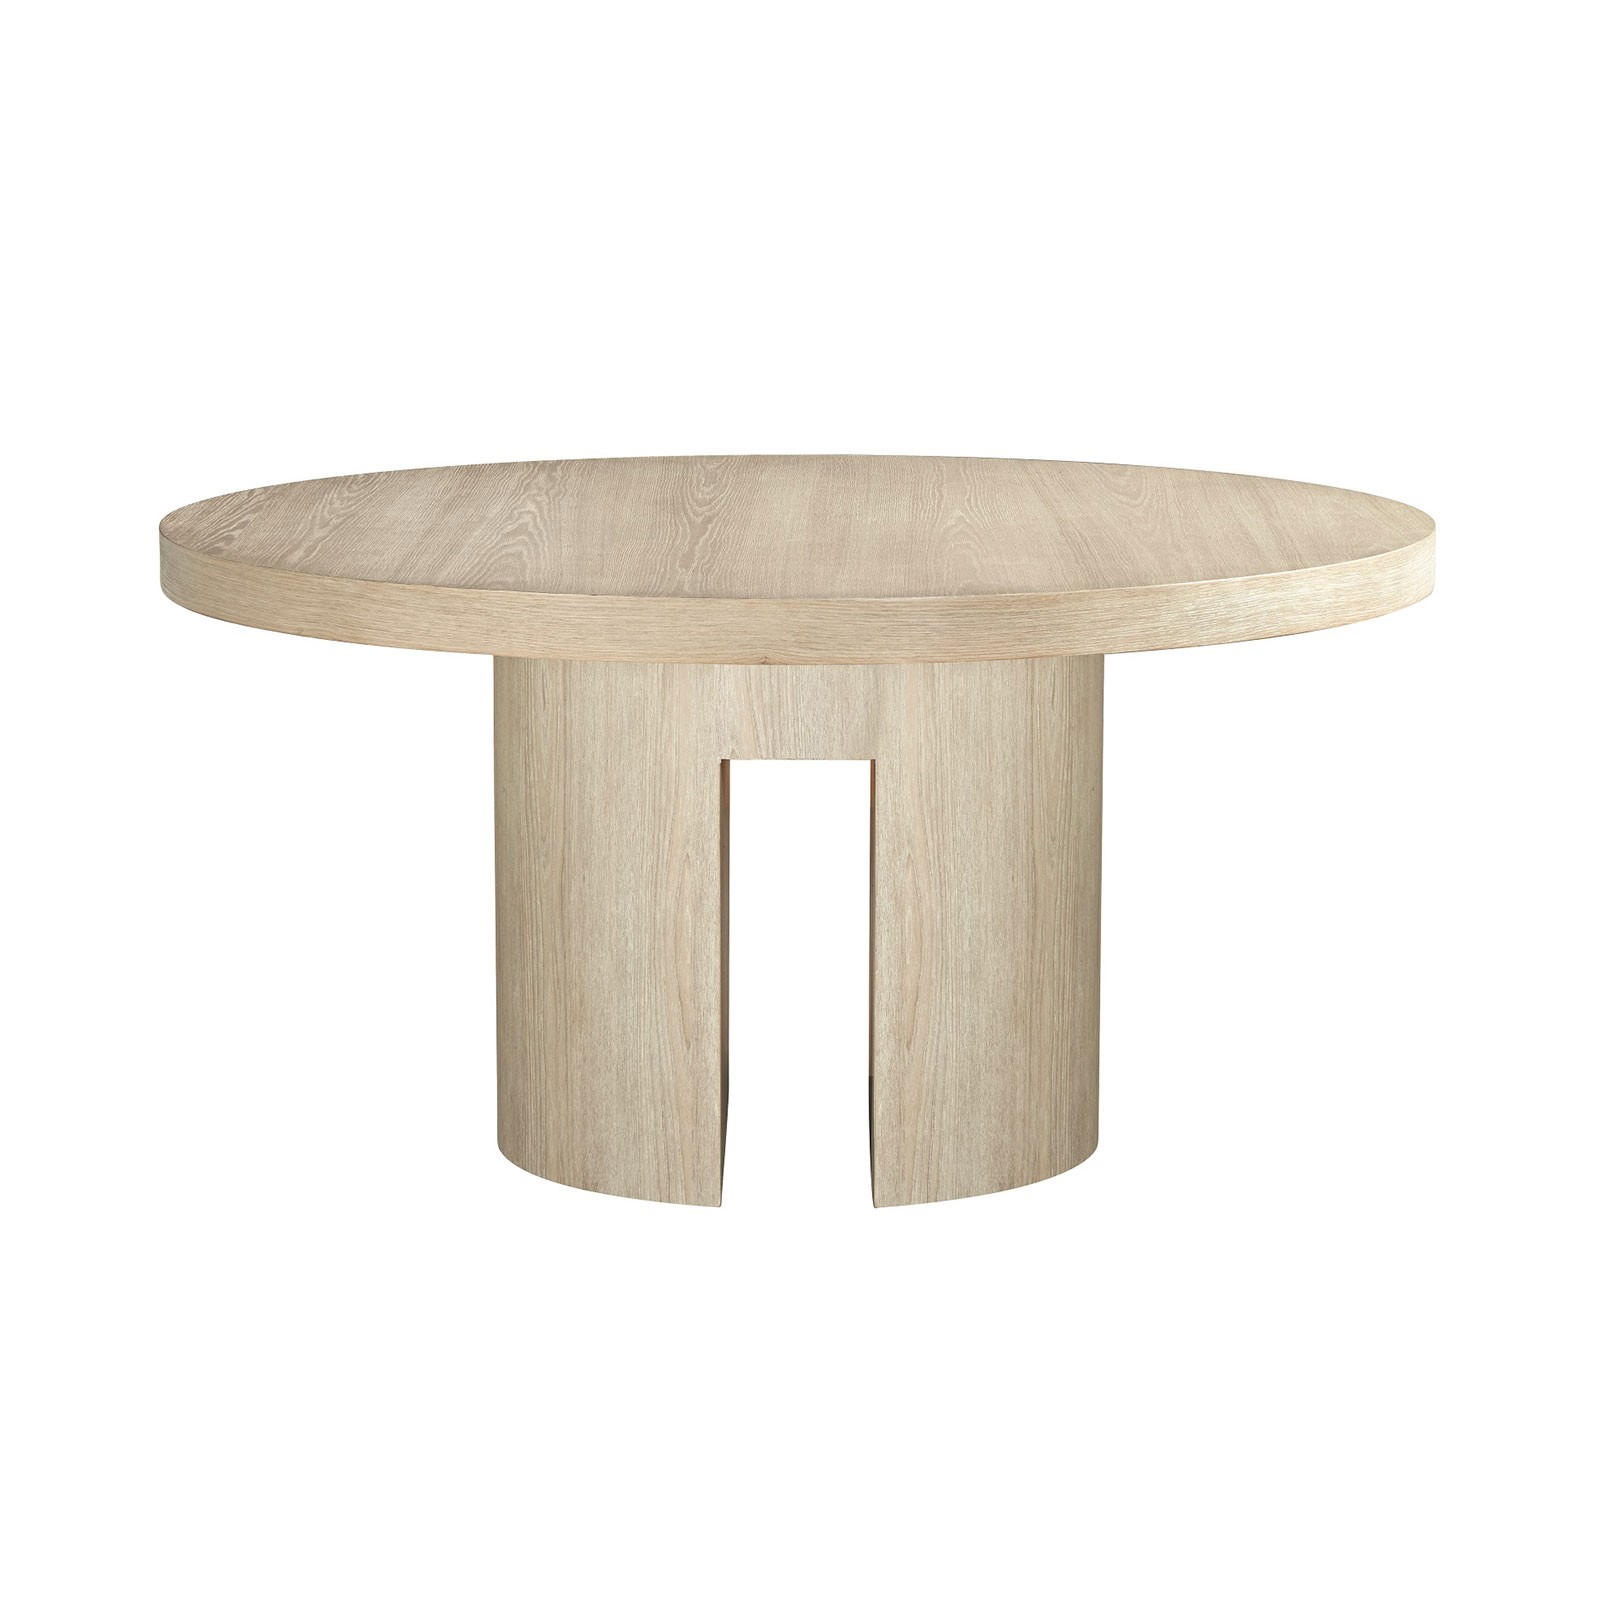 Firenza 120cm round table - Dining Tables (3604) - Sena Home Furniture